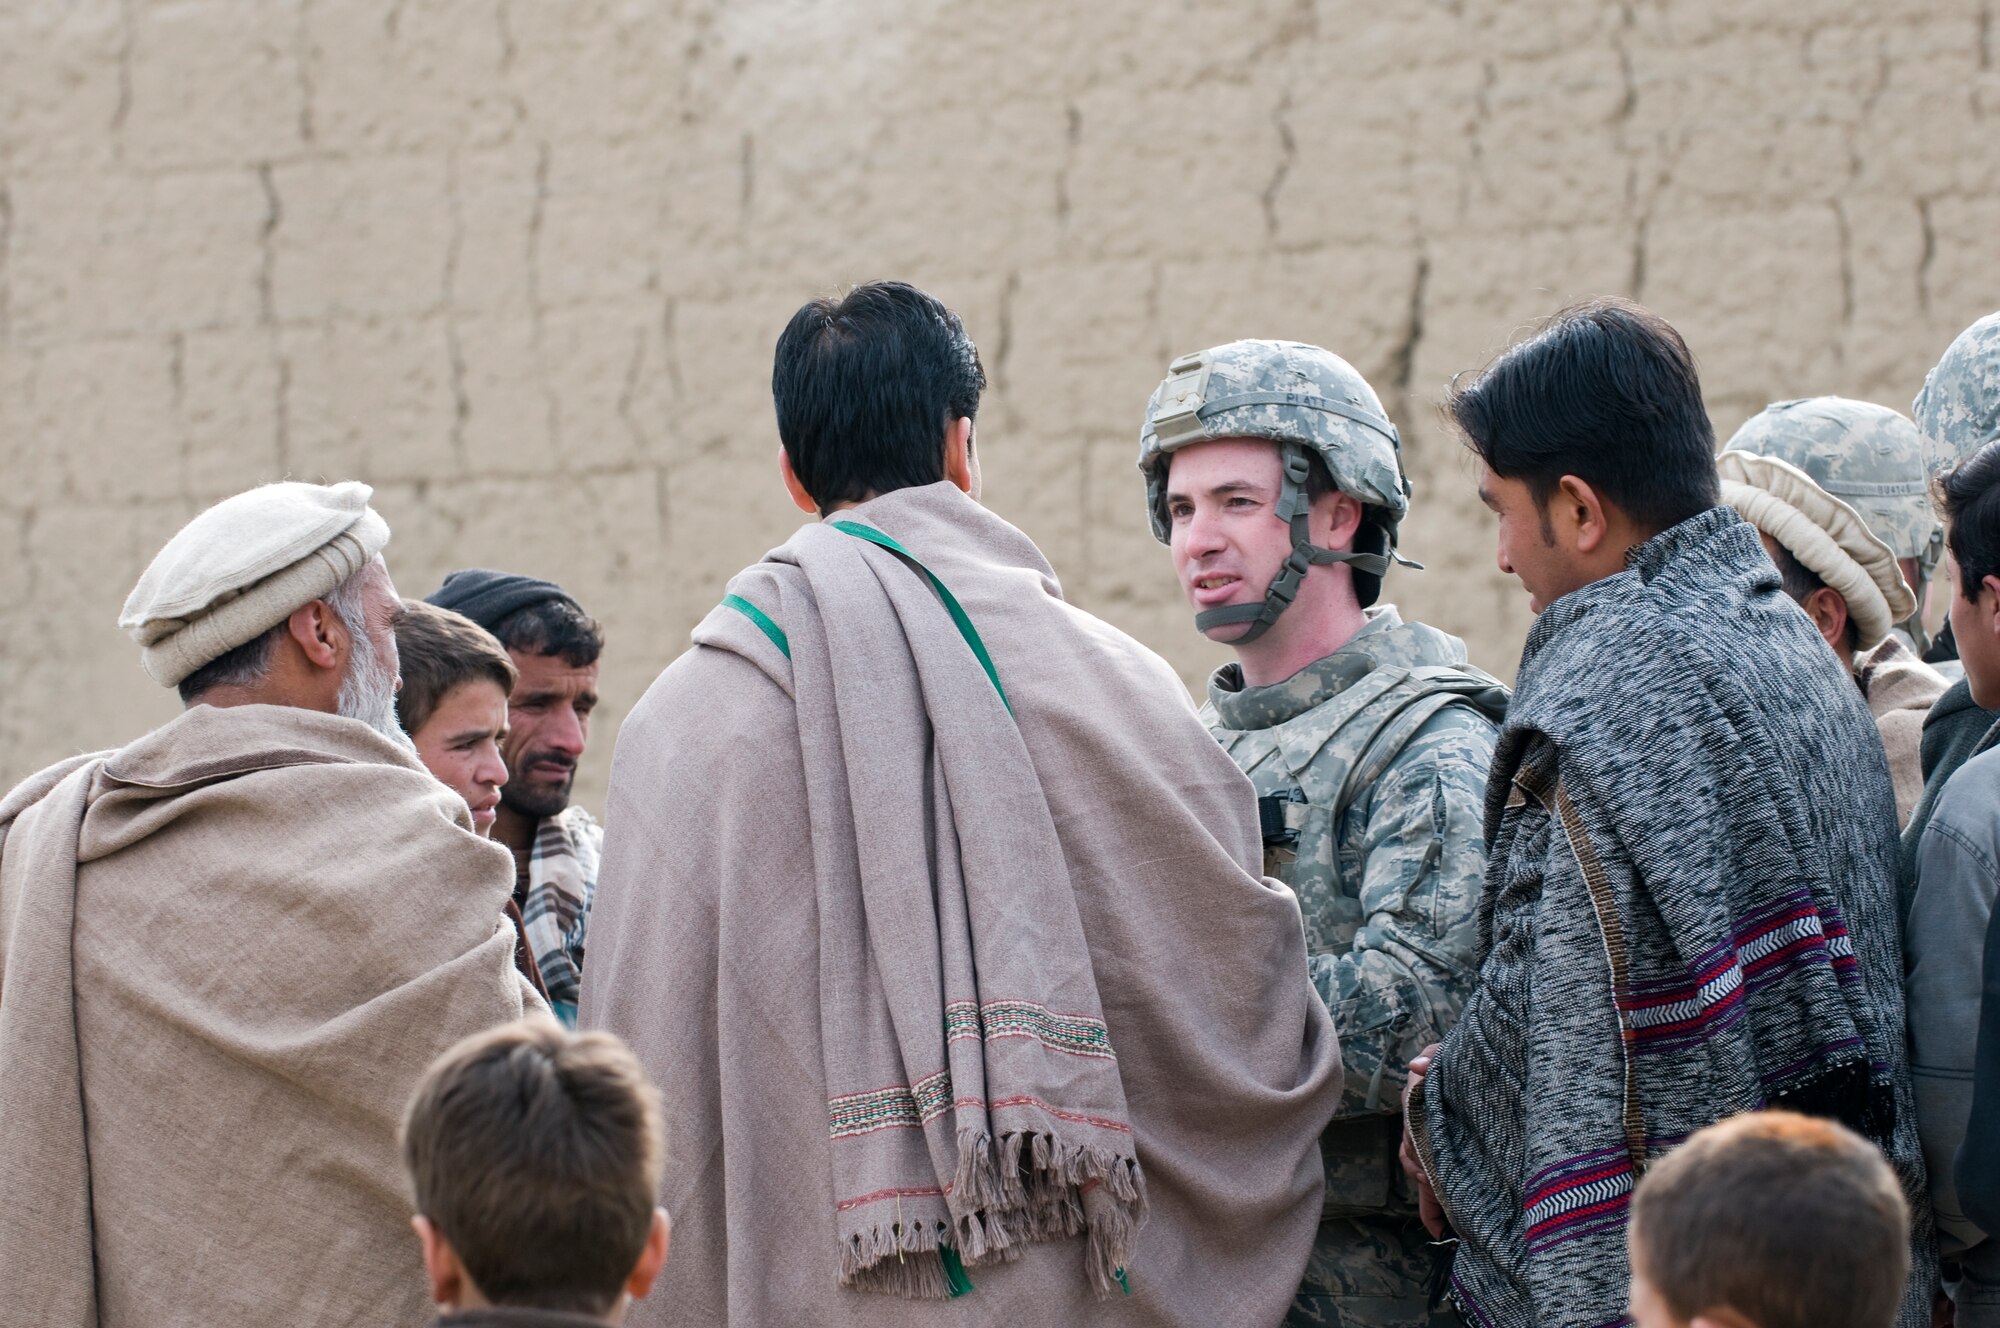 KAPISA PROVINCE, Afghanistan – U.S. Air Force Capt. Seth Platt, Kapisa Provincial Reconstruction Team civil engineer from Pomfret, Conn., meets with locals during a site survey for the proposed Abdul Hadi Padar secondary school in the Nijrab valley. This site survey was conducted with Kapisa provincial development council representatives, Kapisa Ministry of Education engineers, and local village elders and shura members to ensure everyone’s input was taken into consideration. By working together, the group is able to collectively identify the most suitable locations for proposed projects. The mission of Kapisa PRT is to help facilitate the local and national governments of Afghanistan working together to help provide for the development and security needs of the Afghan people.  (Photo by U.S. Air Force Staff Sgt. Kyle Brasier, Kapisa Provincial Reconstruction Team / released) 